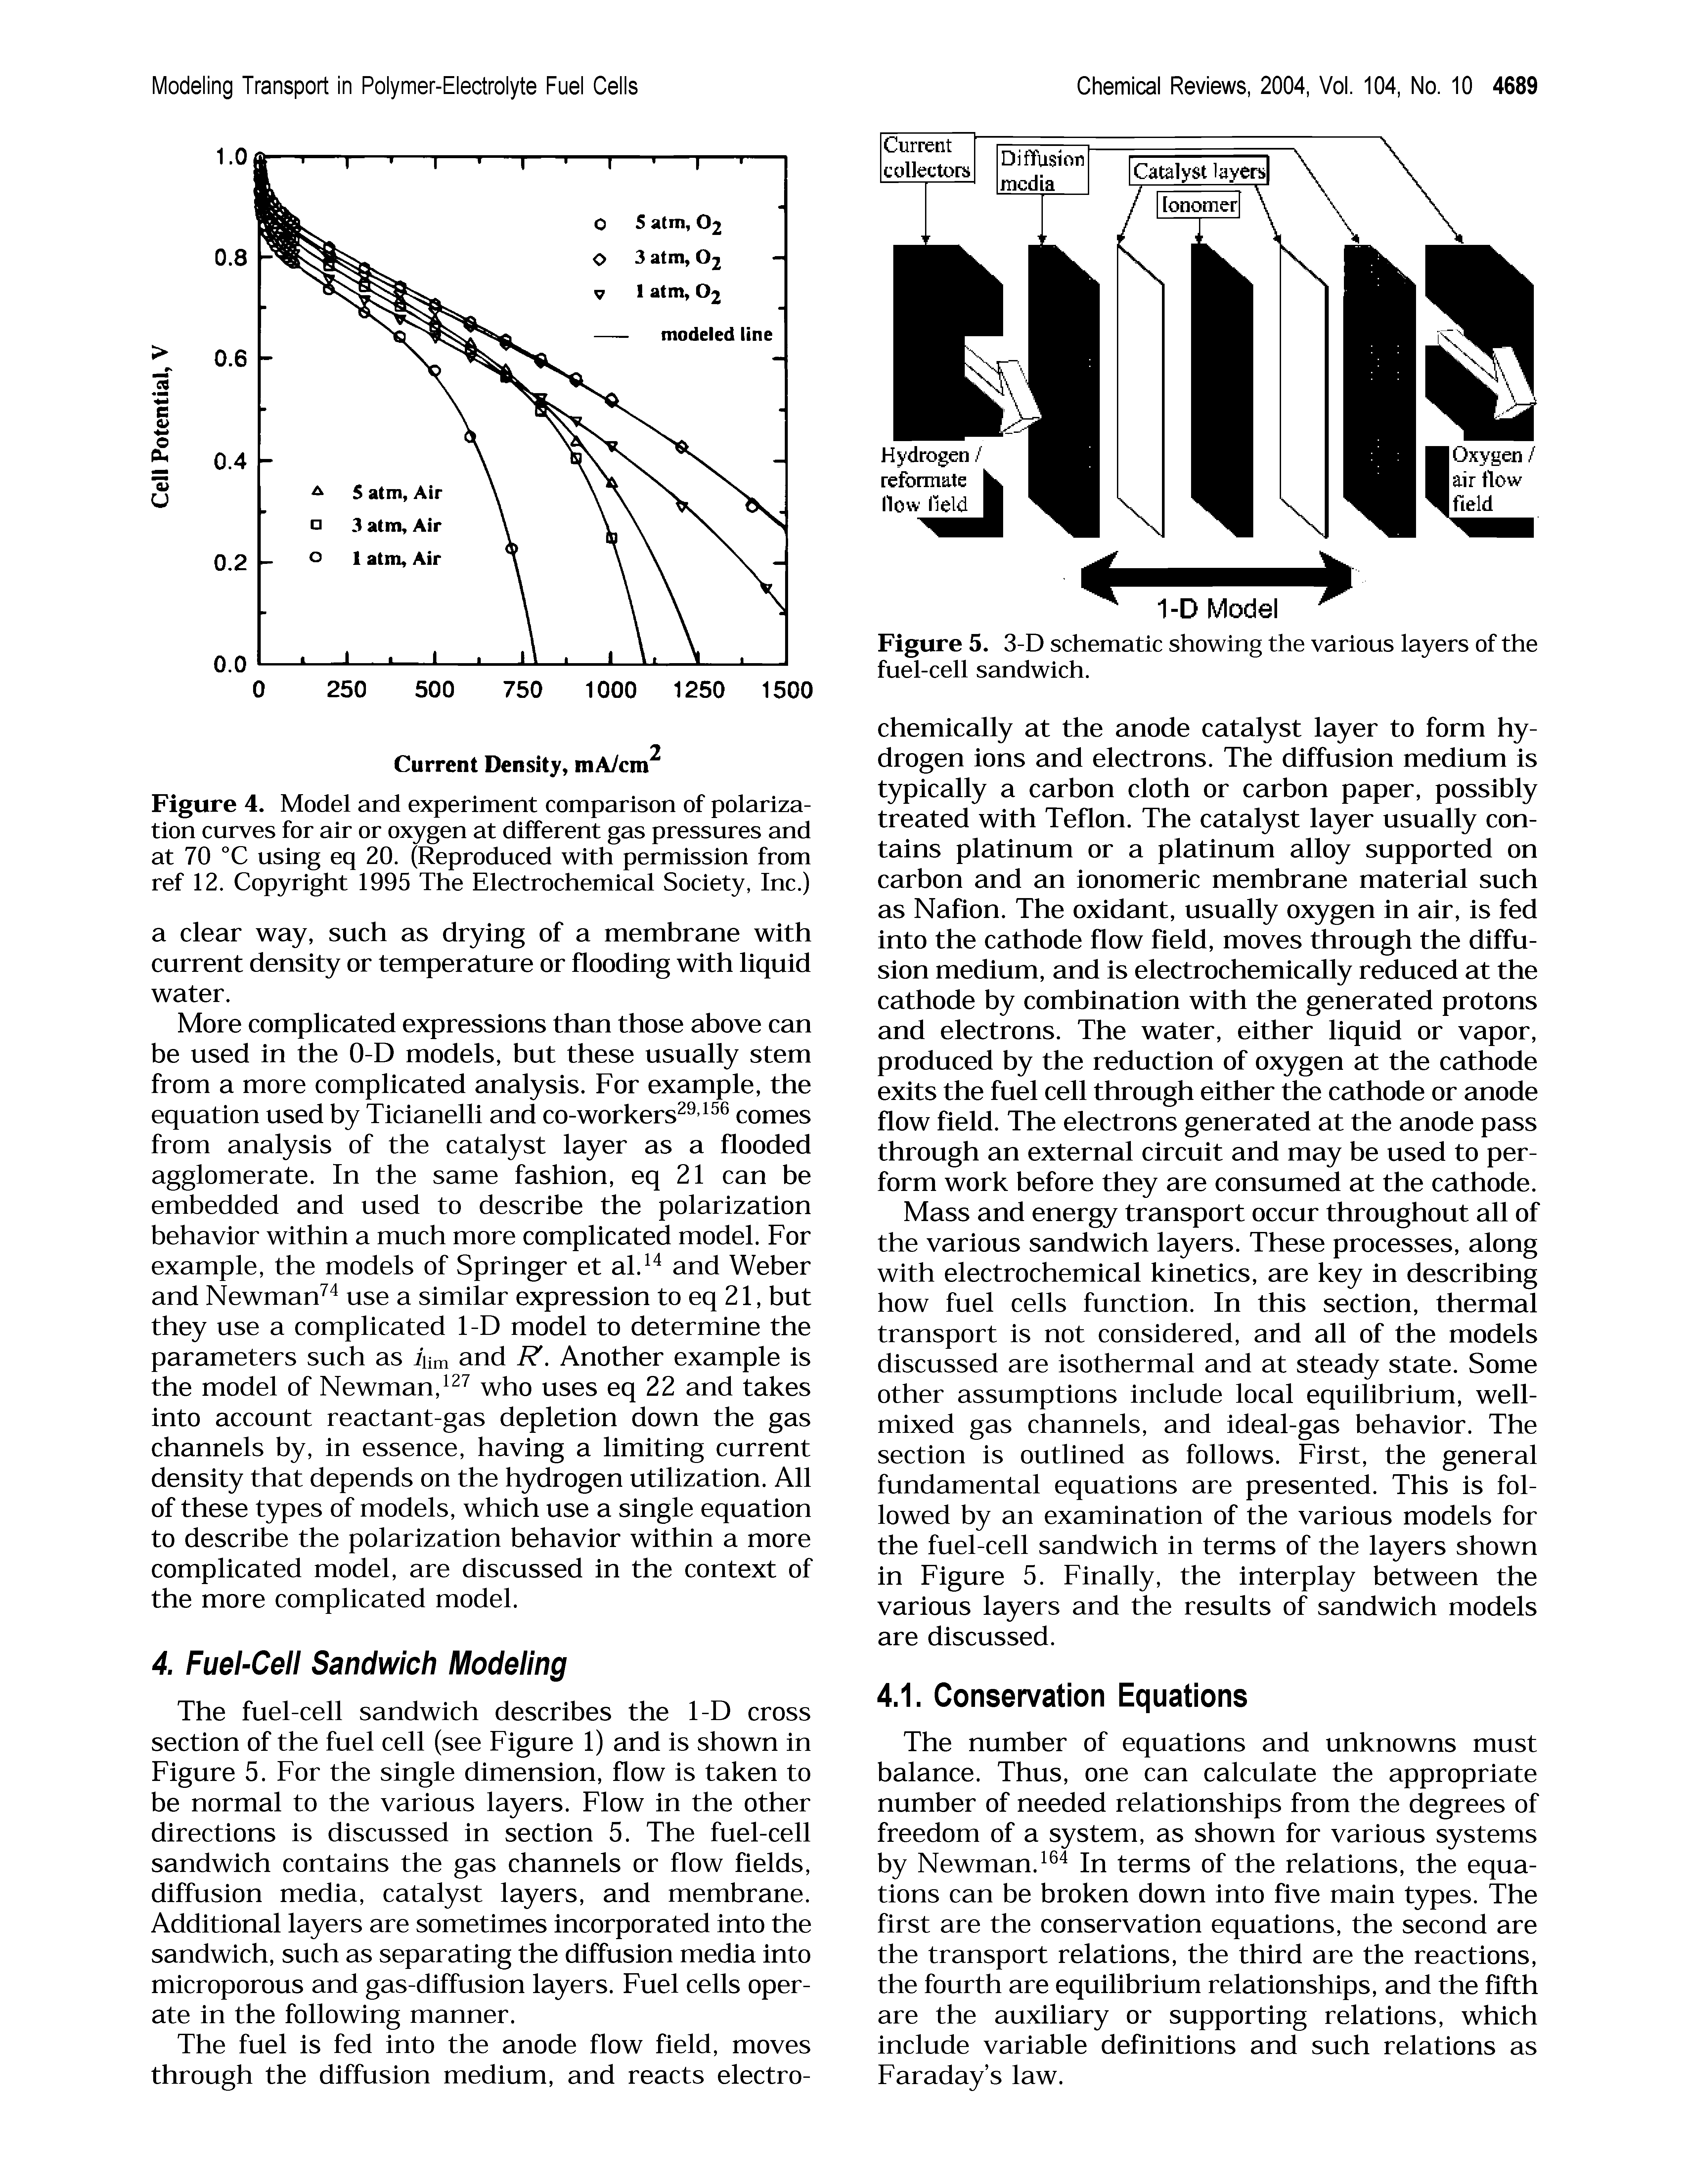 Figure 4. Model and experiment comparison of polarization curves for air or oxygen at different gas pressures and at 70 °C using eq 20. (Reproduced with permission from ref 12. Copyright 1995 The Electrochemical Society, Inc.)...